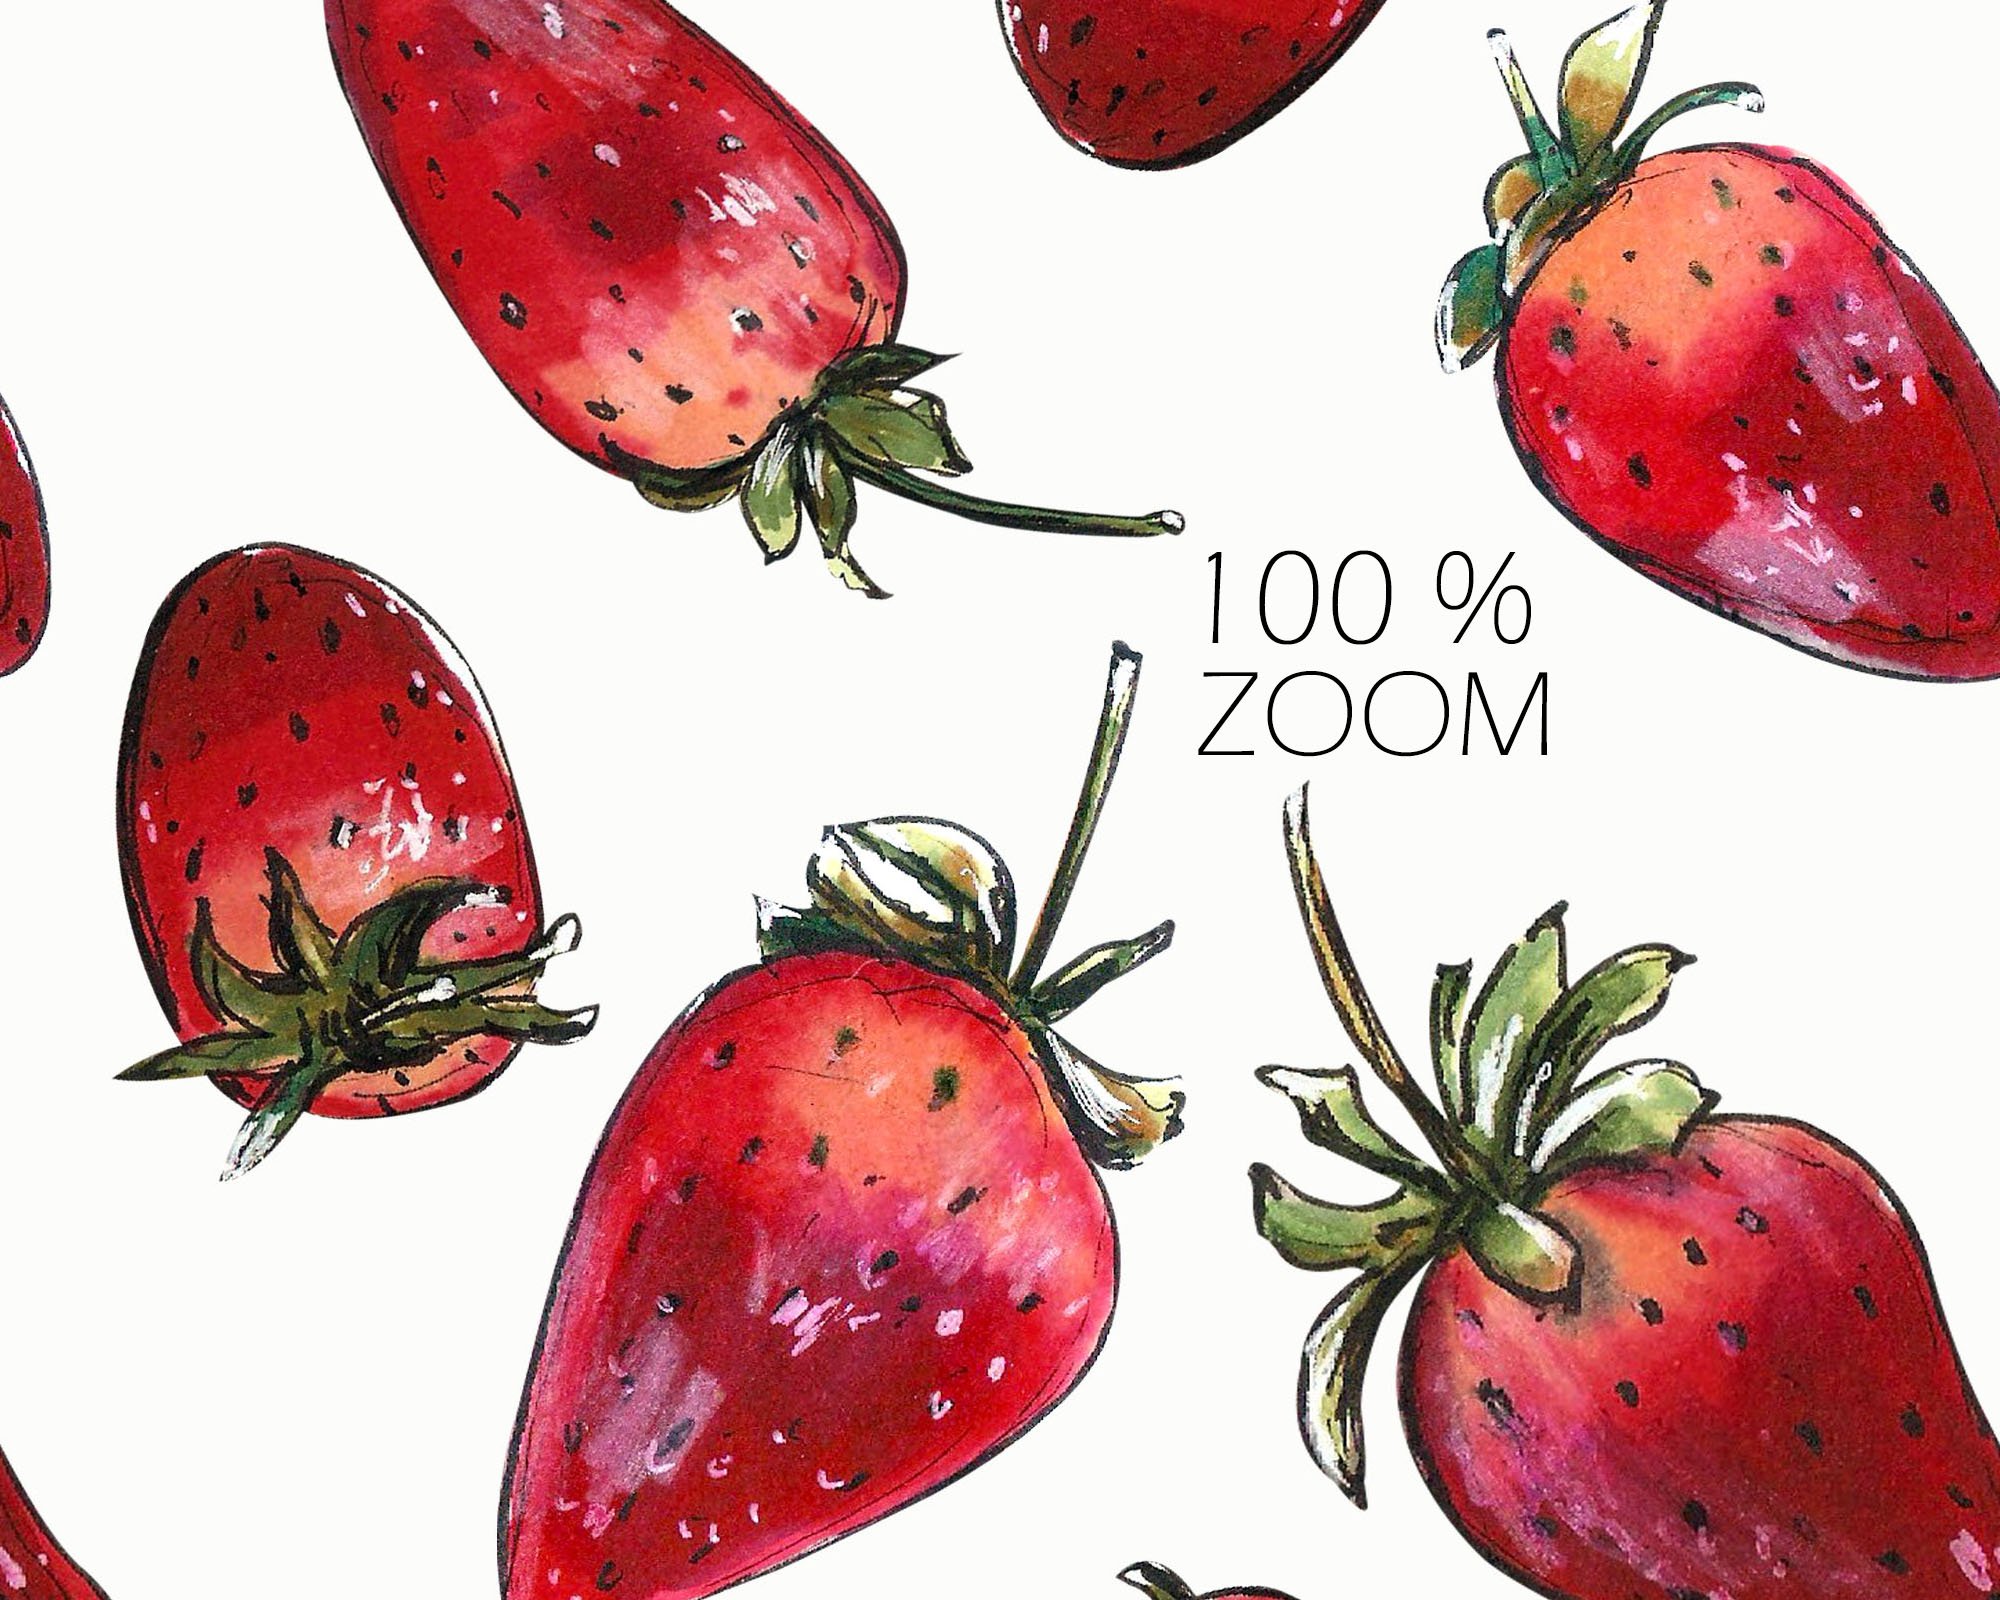 100 % zoom of illustration of strawberries on a white background.